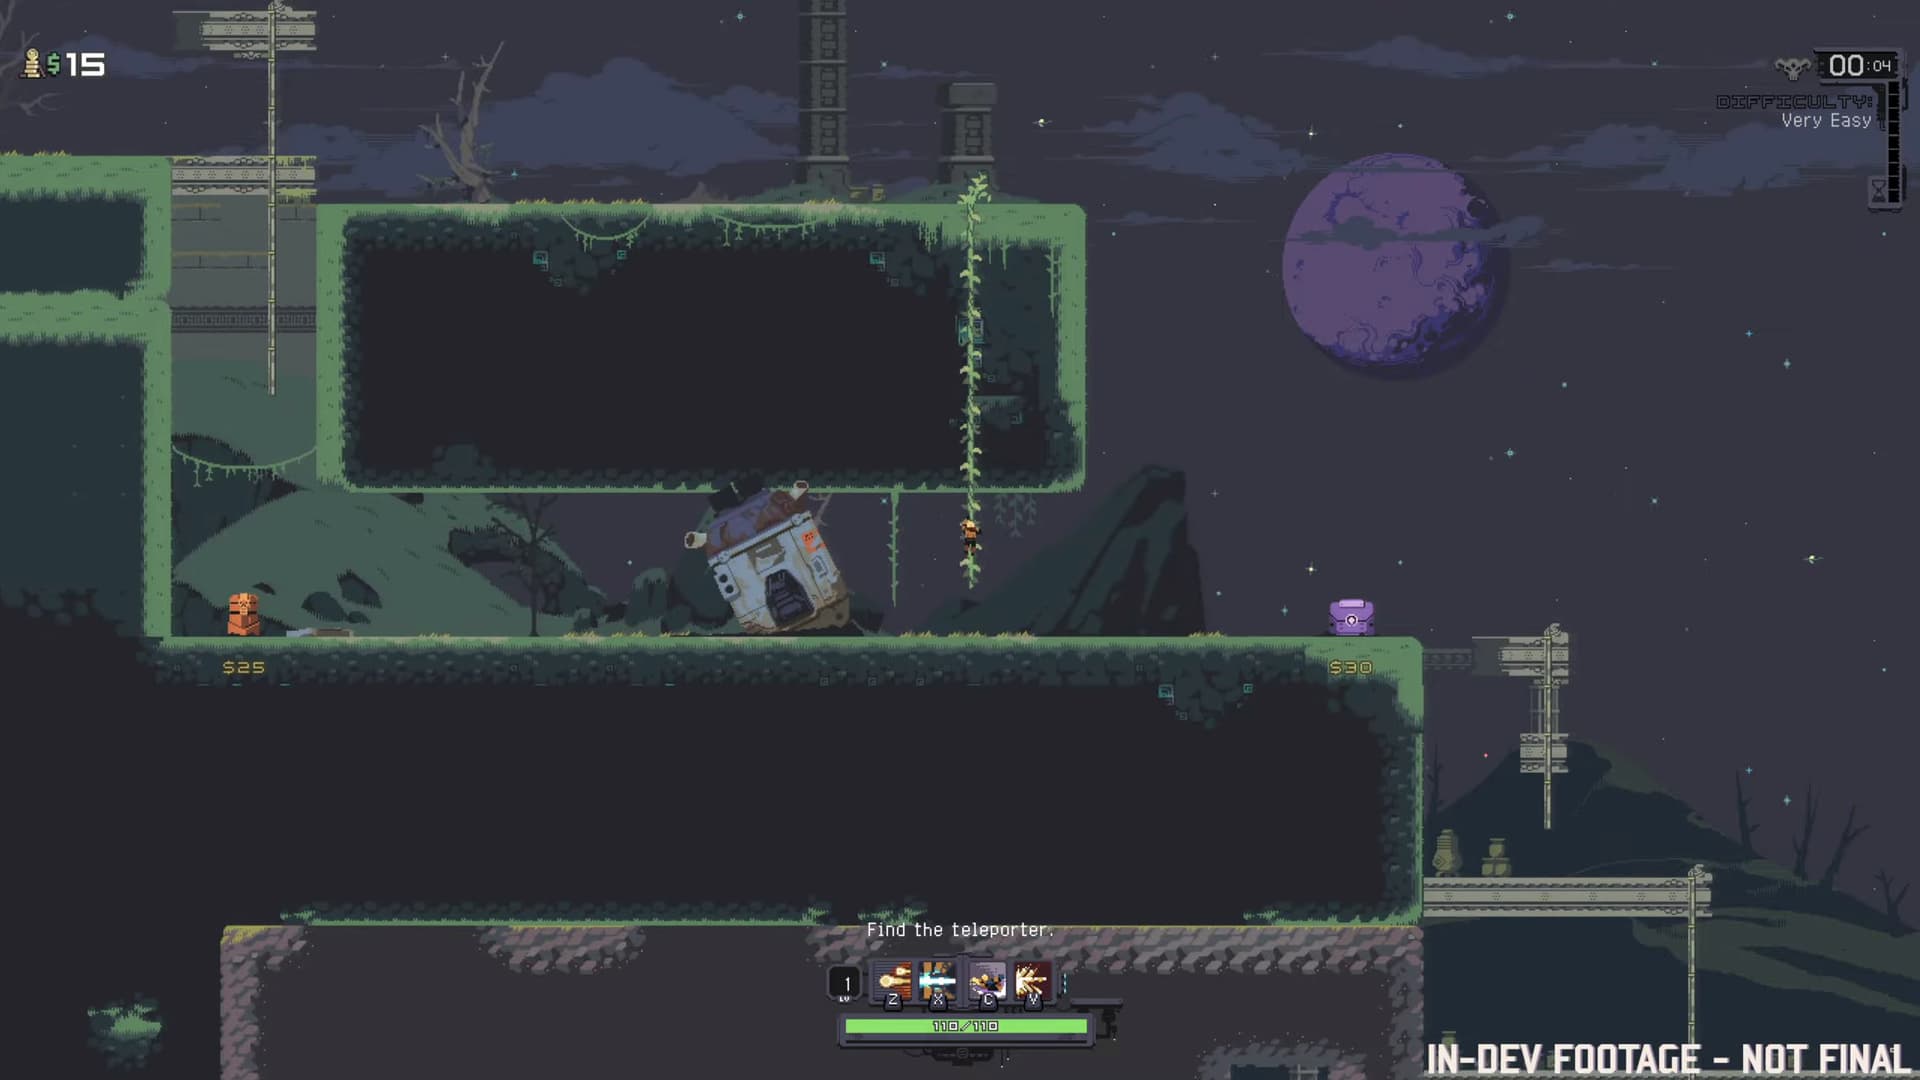 Screenshot from the trailer of Risk of Rain Returns, where we see the player on a ledge surrounded by foliage 